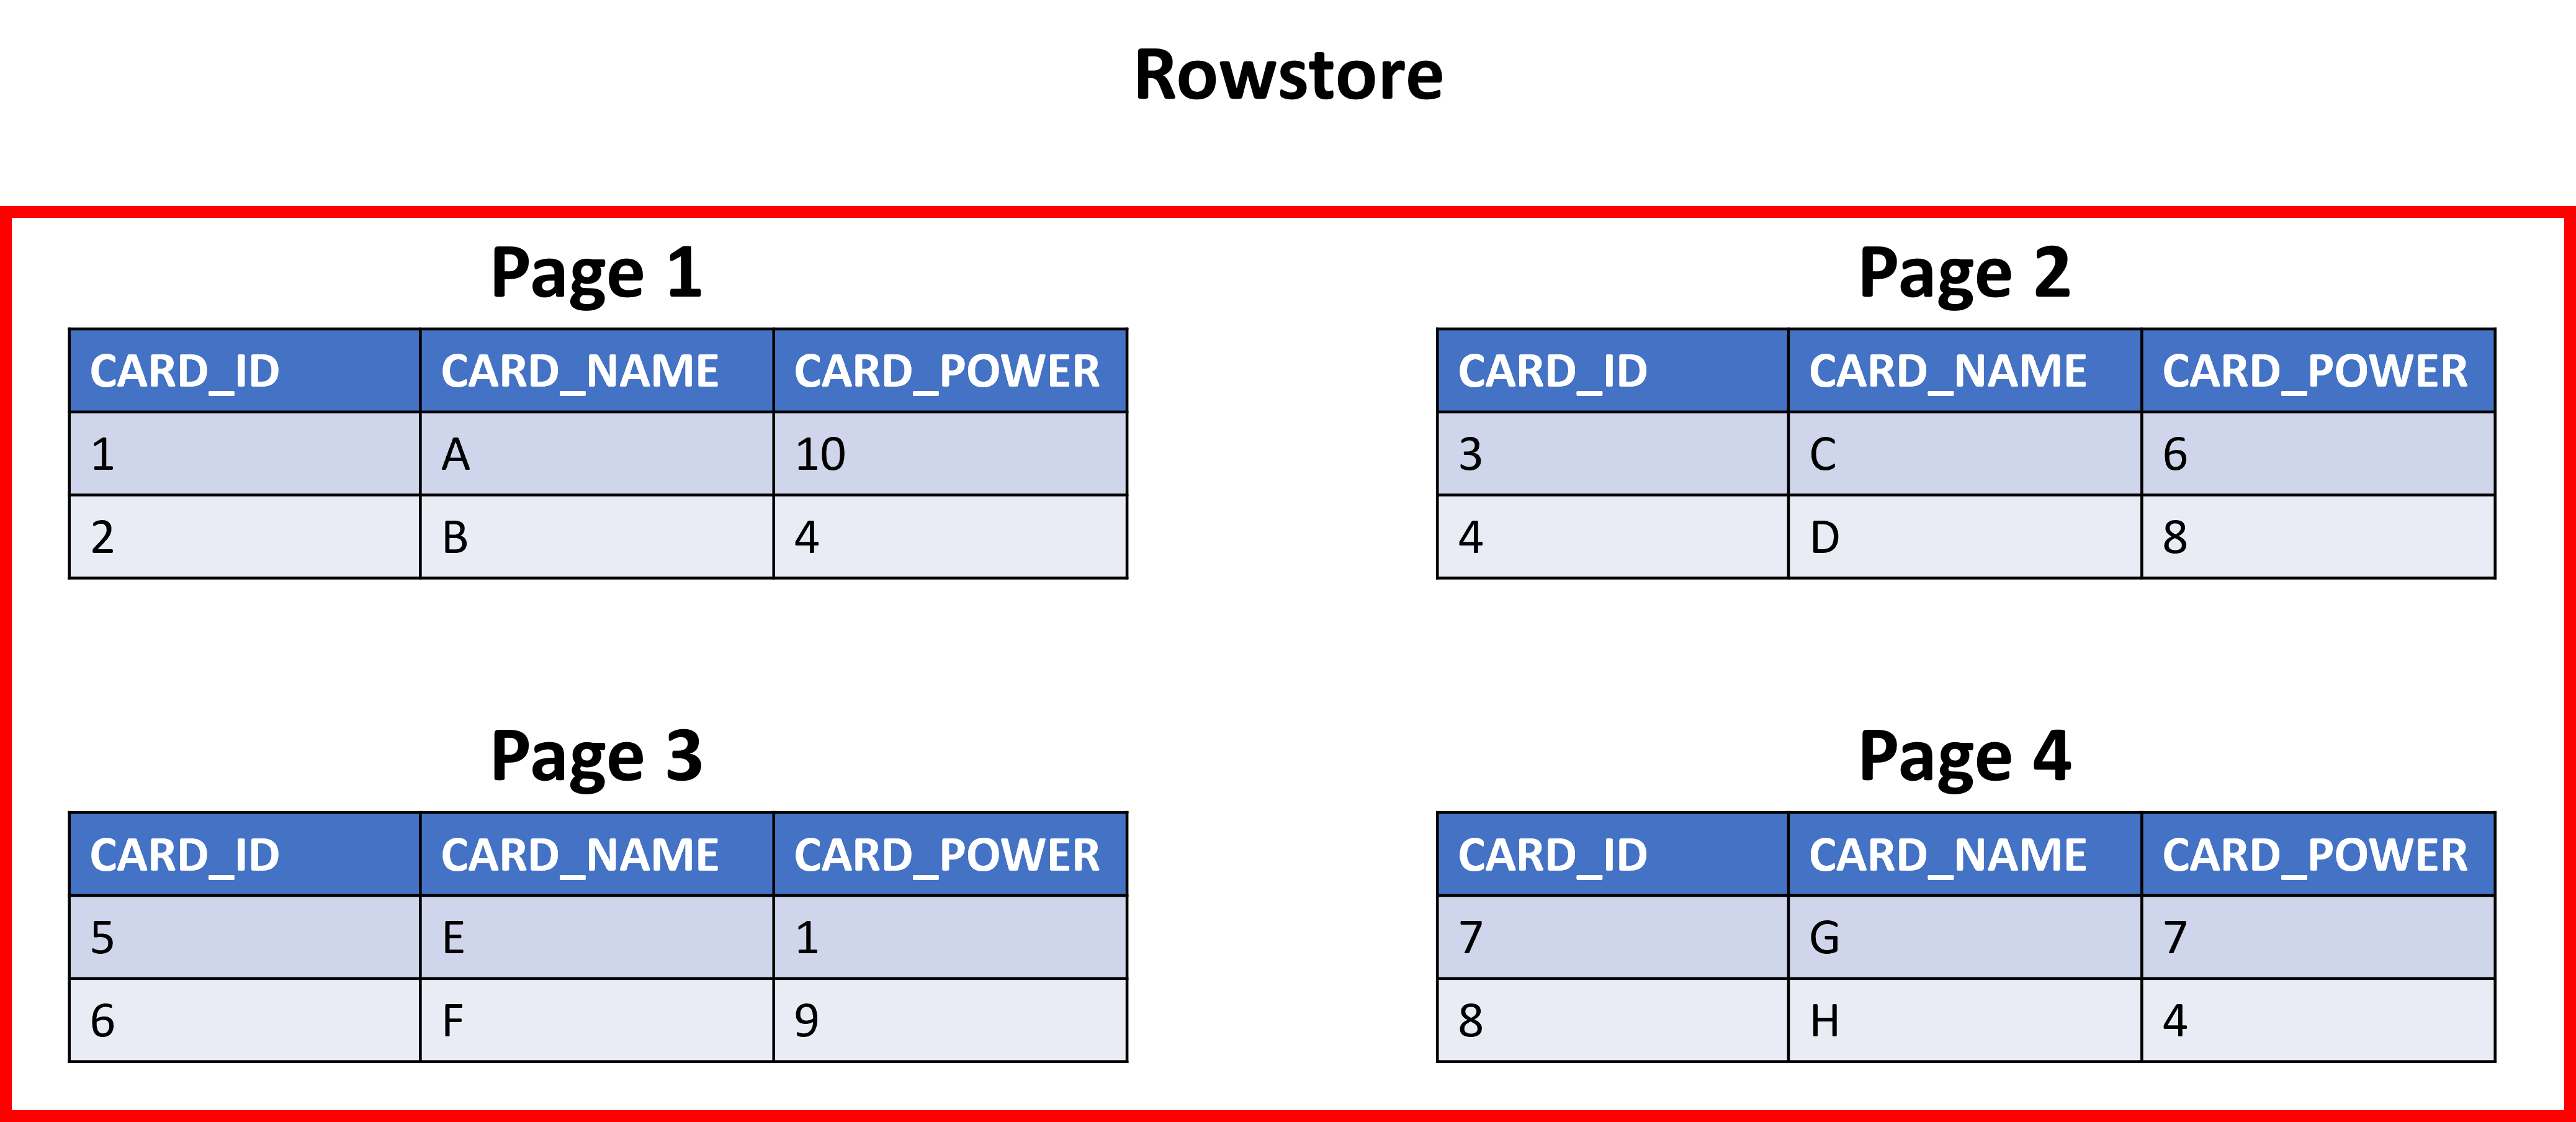 Diagram showing how a rowstore works by getting all pages in a query.